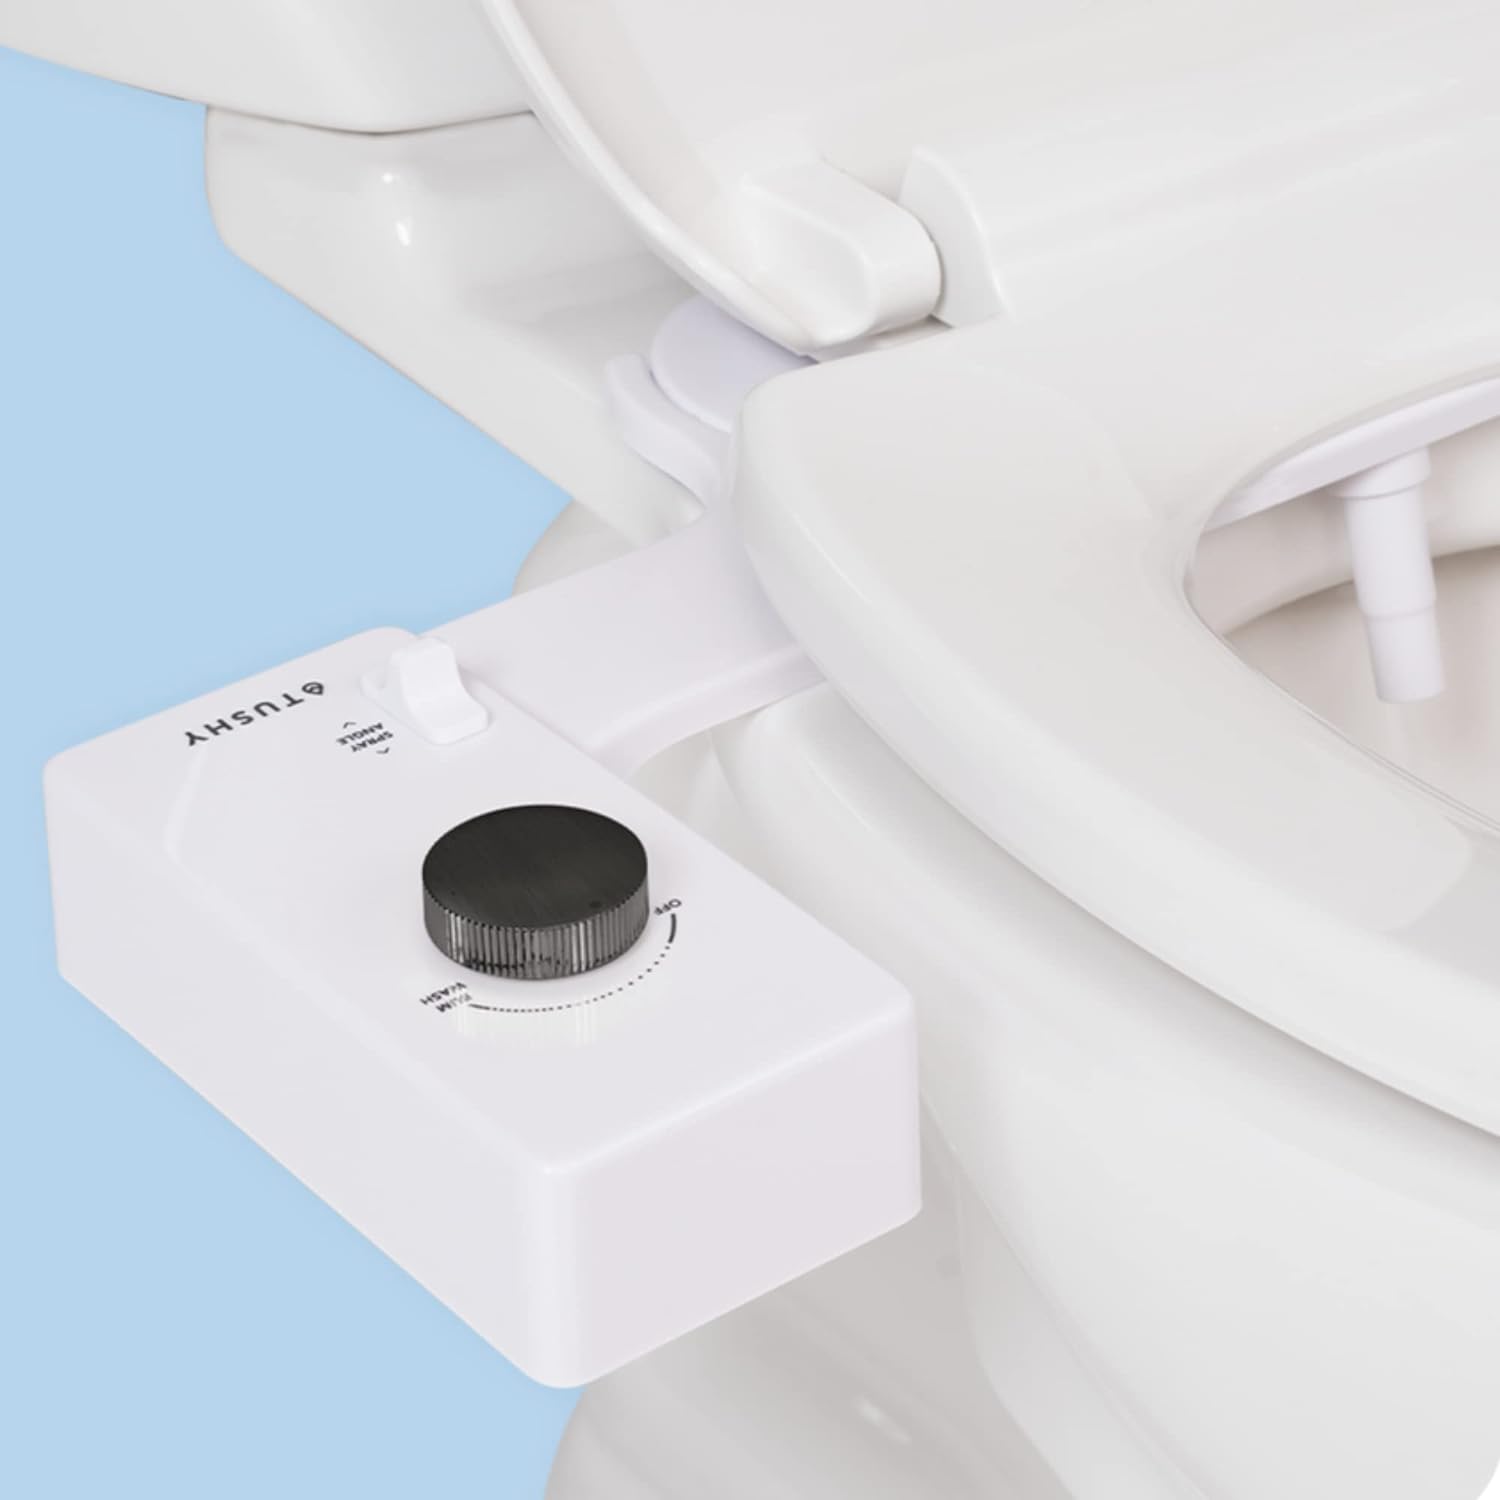 3.0 Bidet Toilet Seat Attachment - Non-Electric Self Cleaning Water Sprayer, Adjustable Water Pressure Nozzle, Angle Control, Easy Home Installation